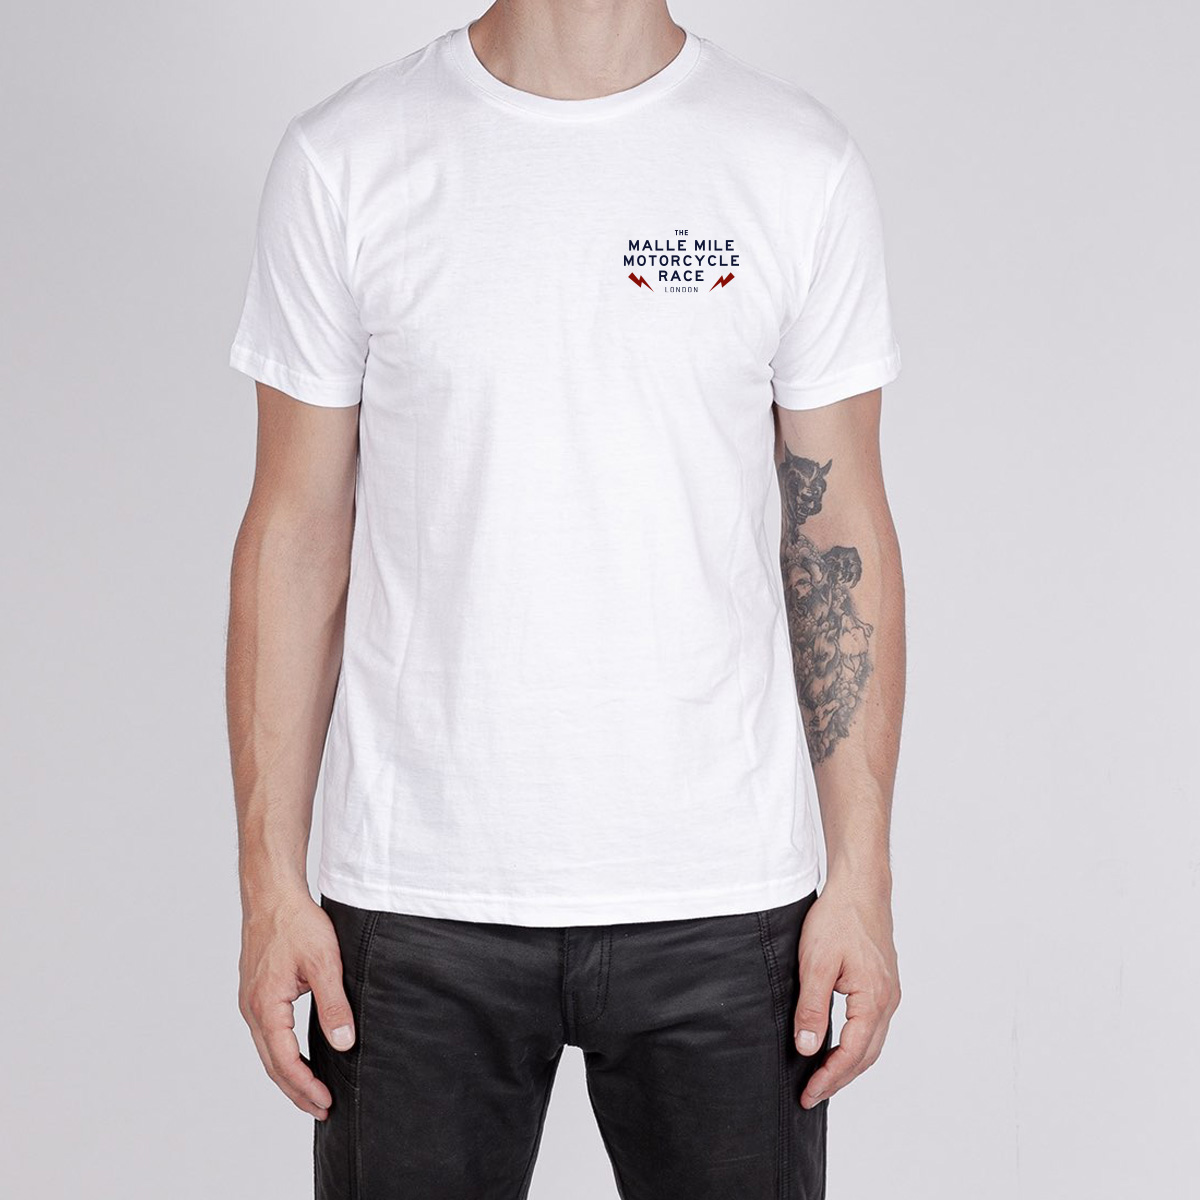 The Malle Mile T Shirt - White - Malle London